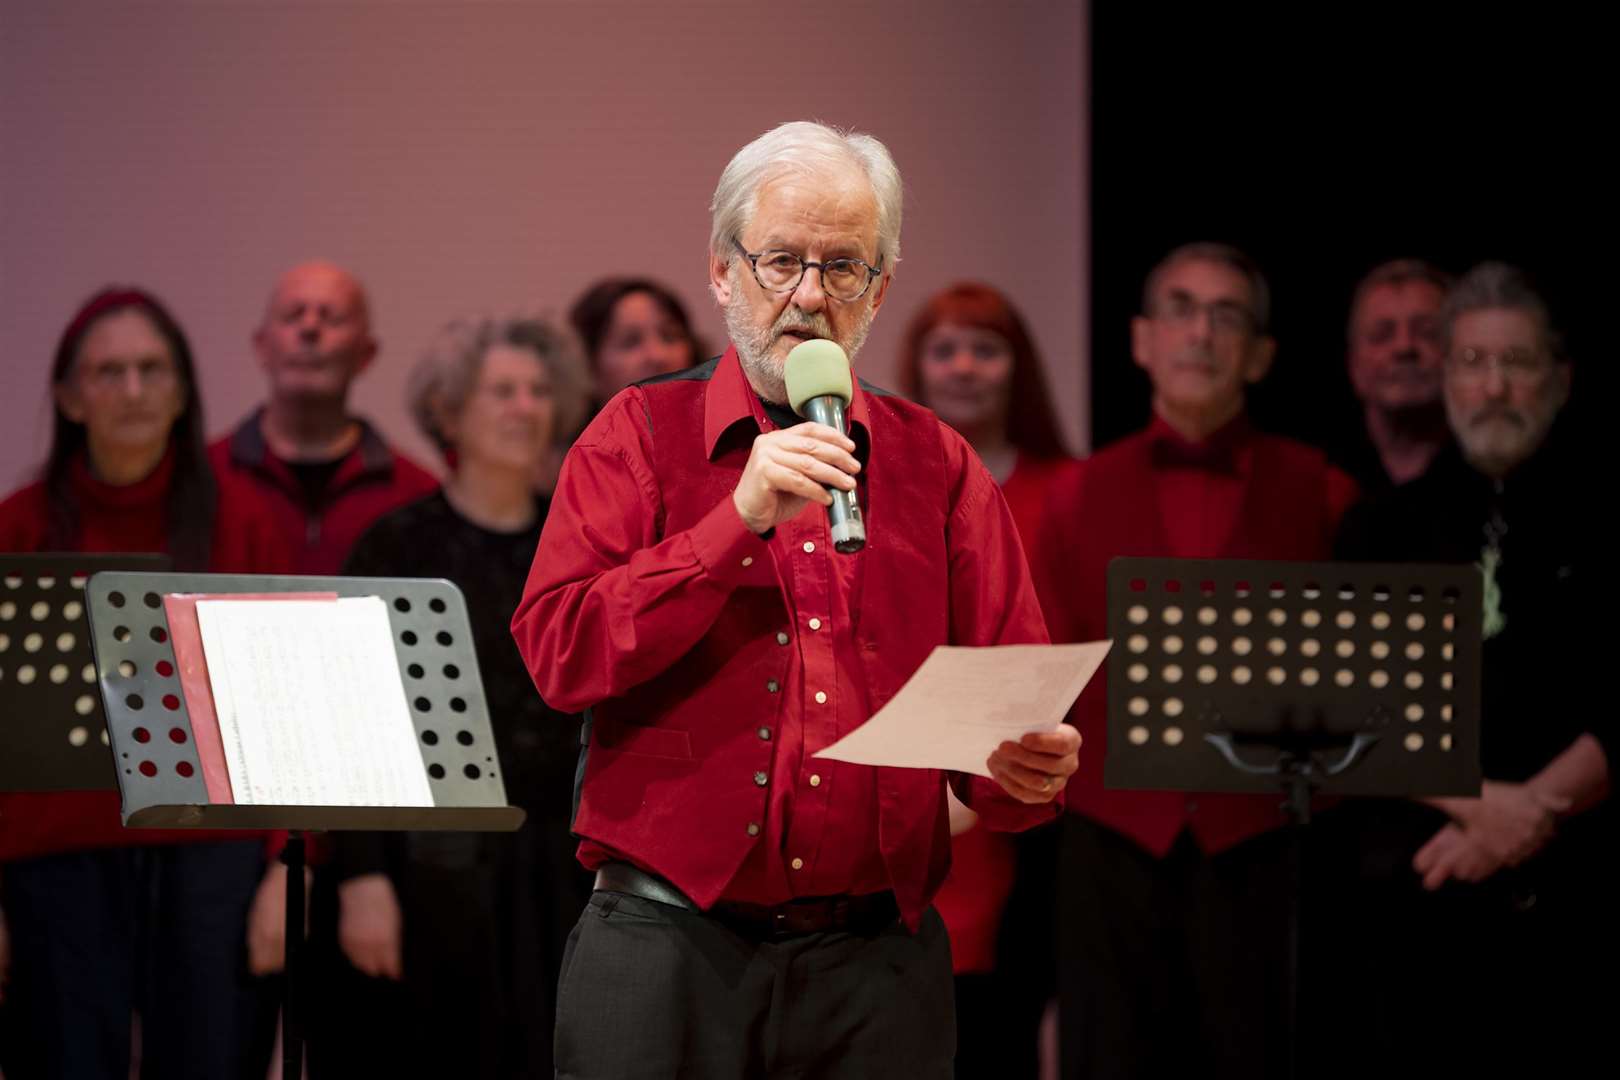 Bill Henderson and the Forres Big Choir at last year's Winter Gathering.